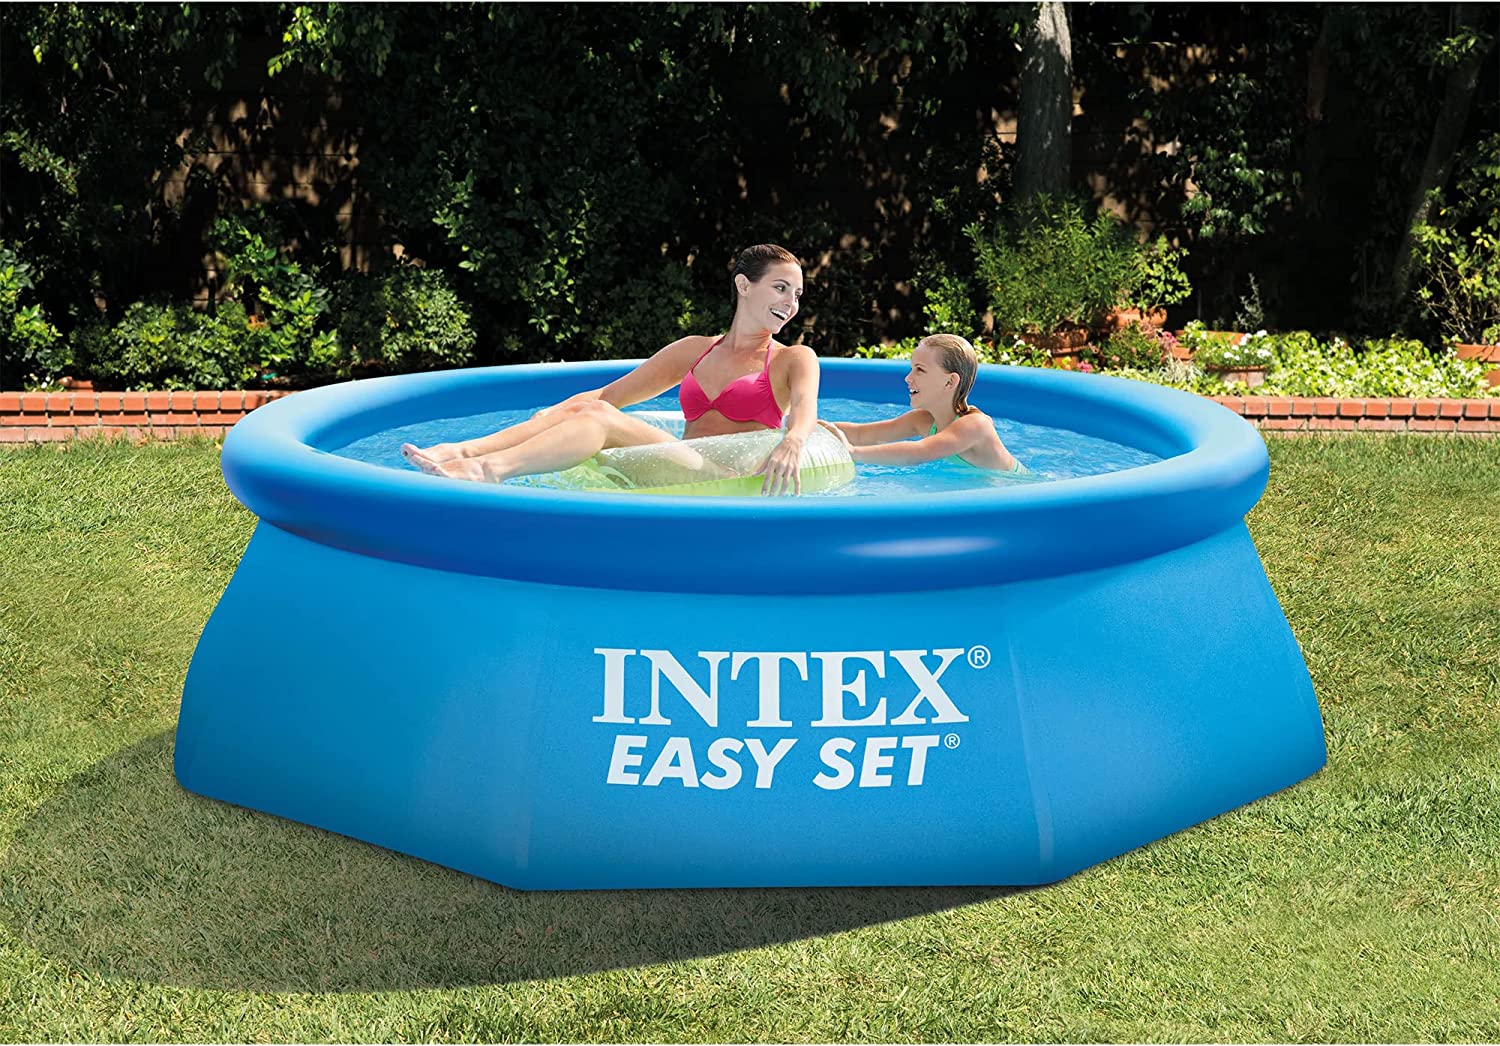 intex 28110eh 8 foot x 30 inch easy setup inflatable portable above ground round family swimming pool